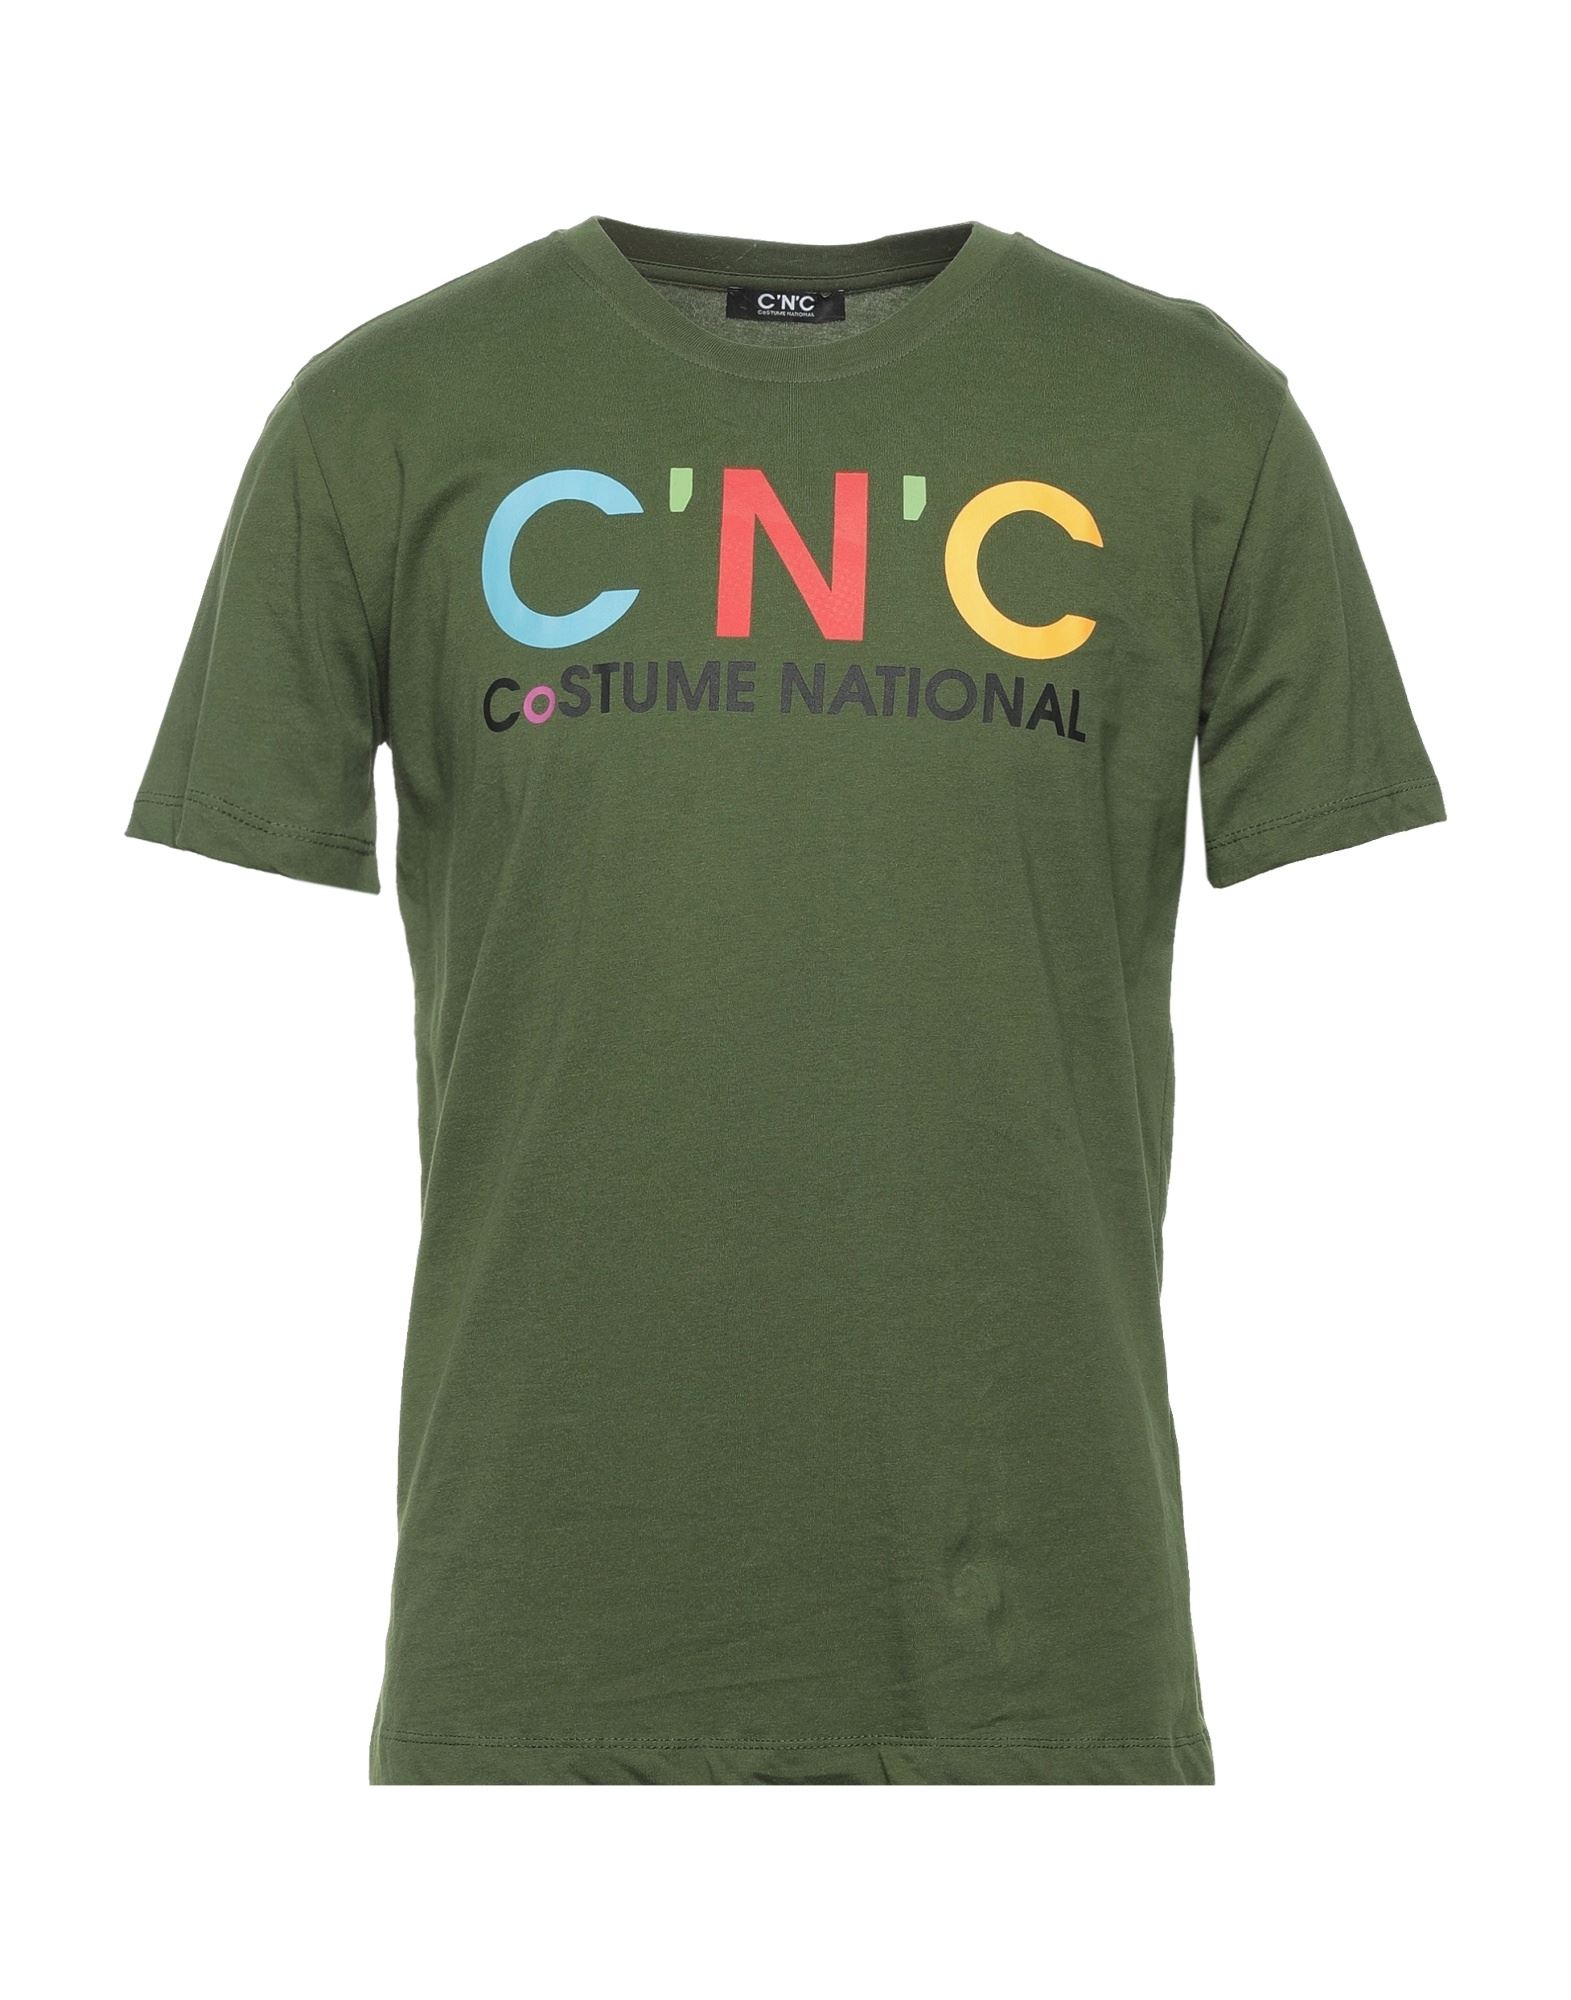 C'N'C' COSTUME NATIONAL C'N'C' COSTUME NATIONAL MAN T-SHIRT MILITARY GREEN SIZE M COTTON